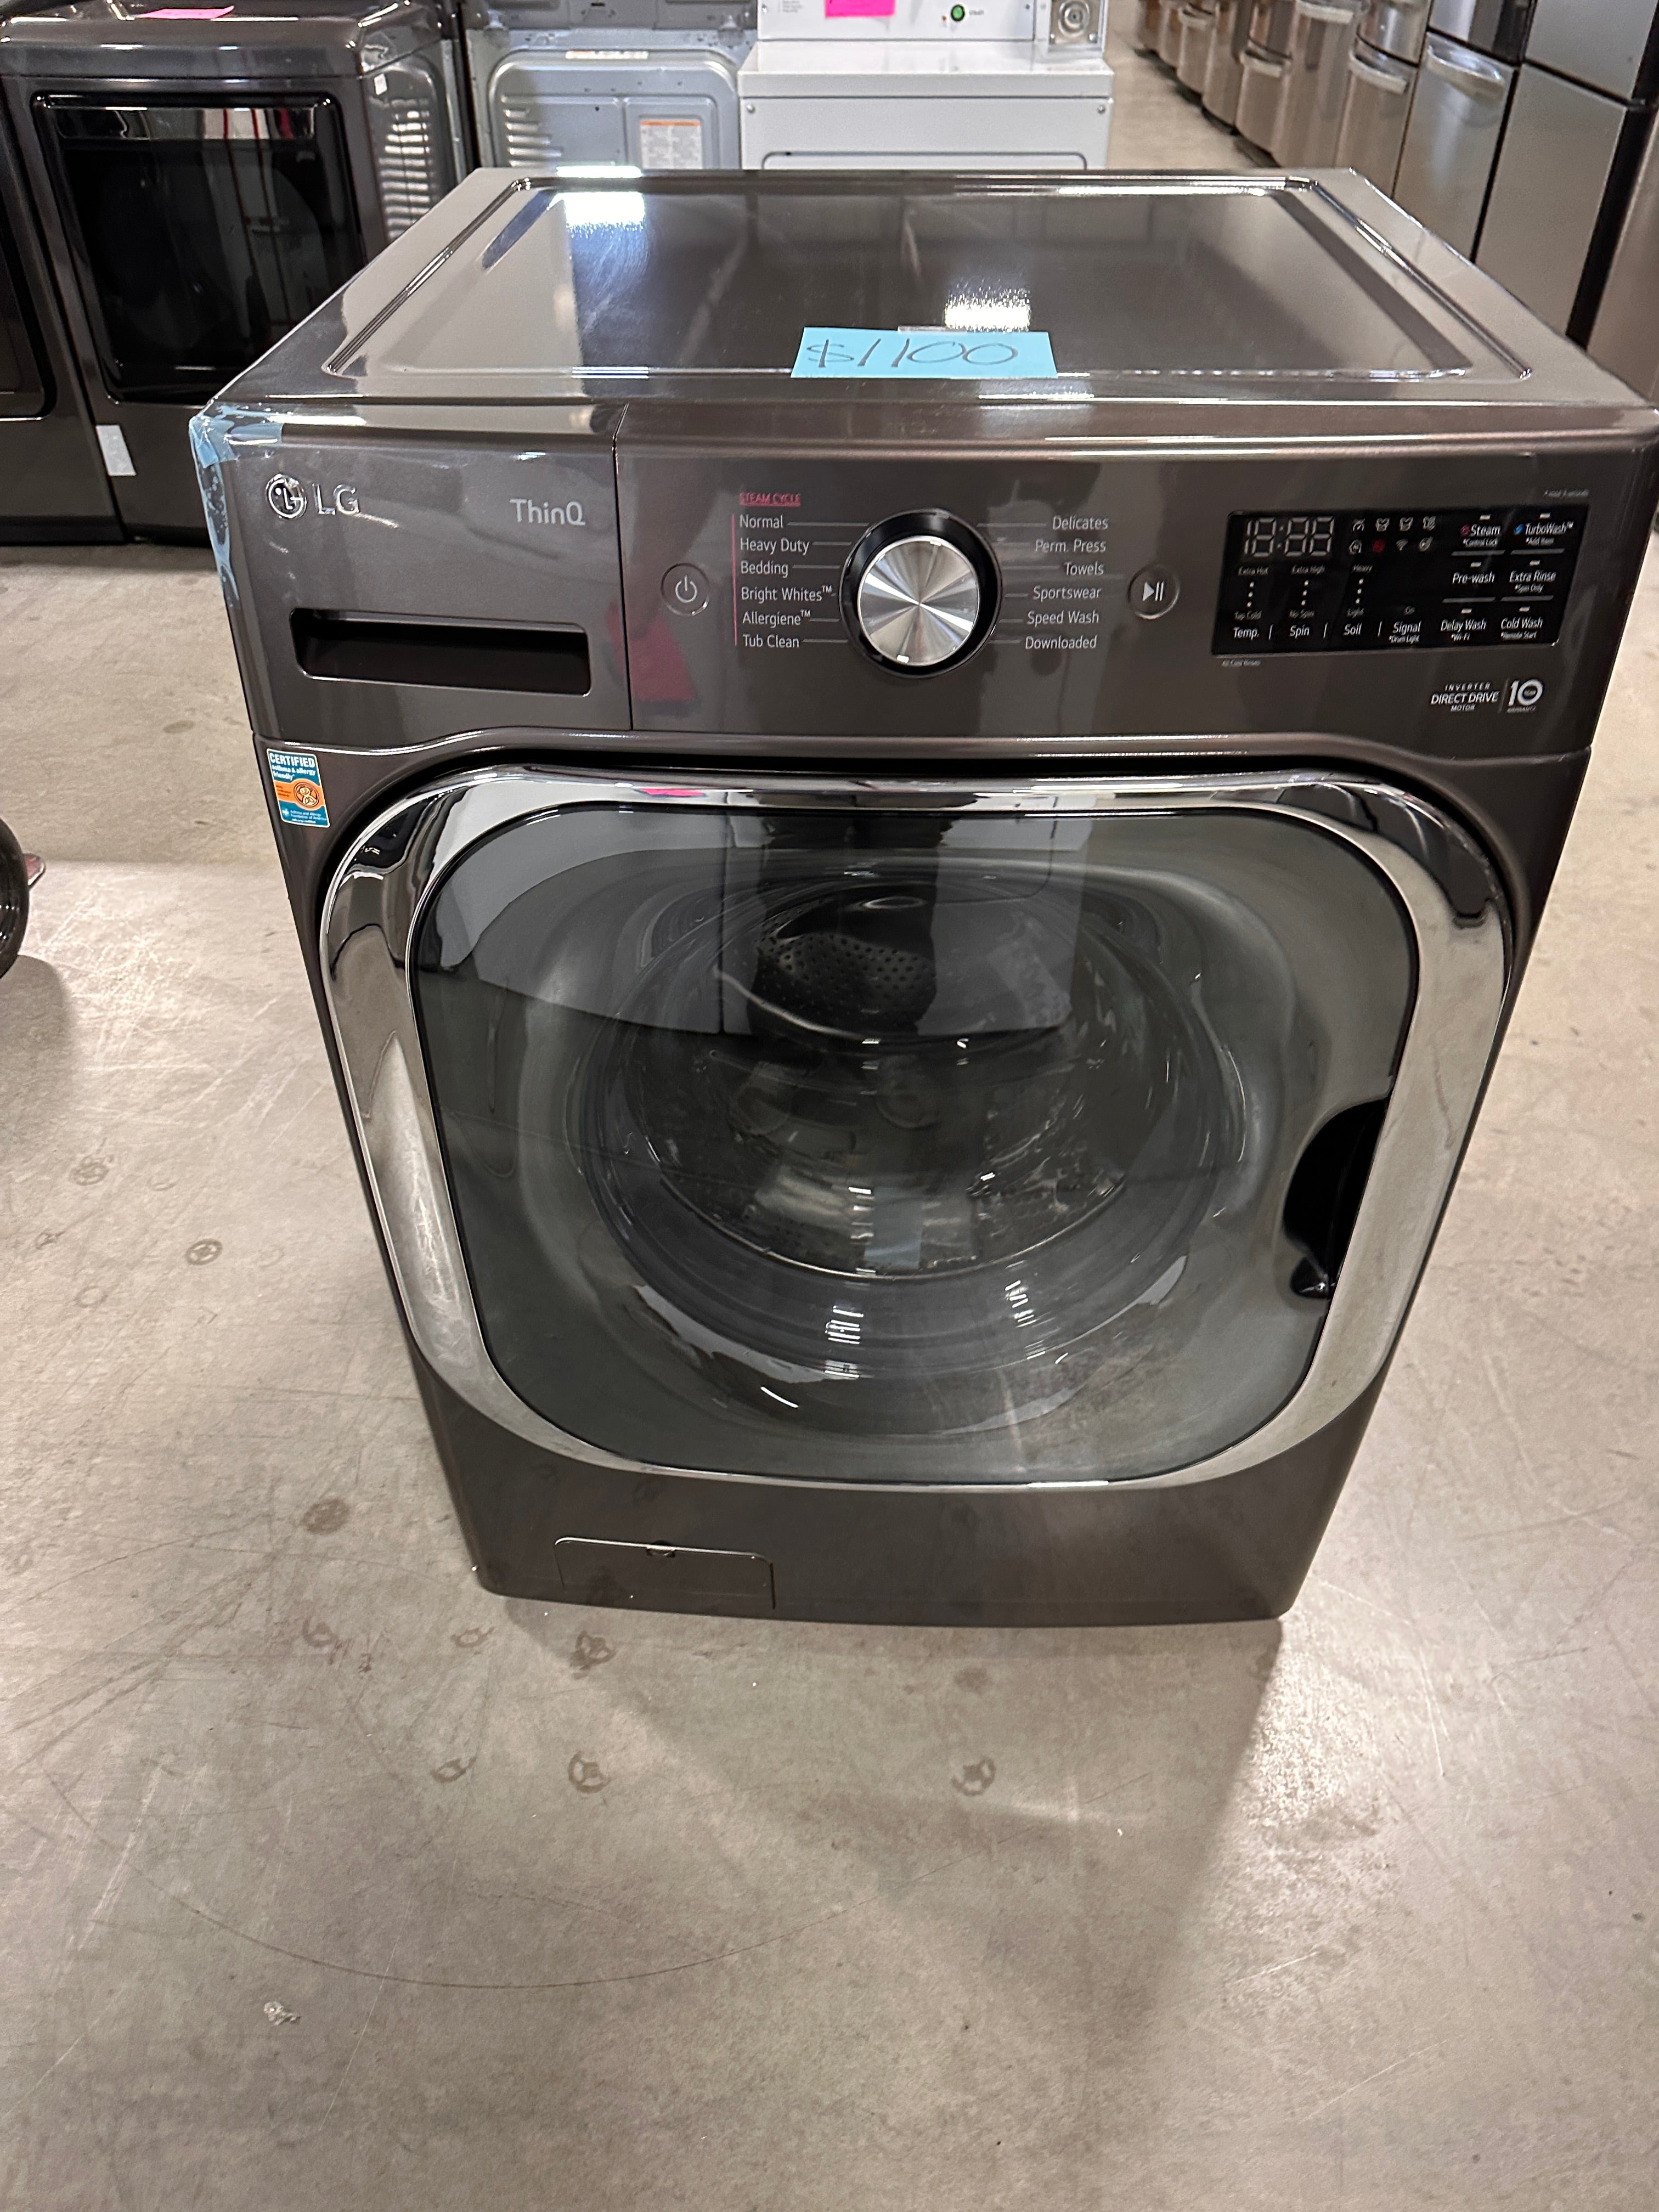 Portable Compact Dryer  Magic Chef Dryer for Sale in Costa Mesa, CA -  OfferUp